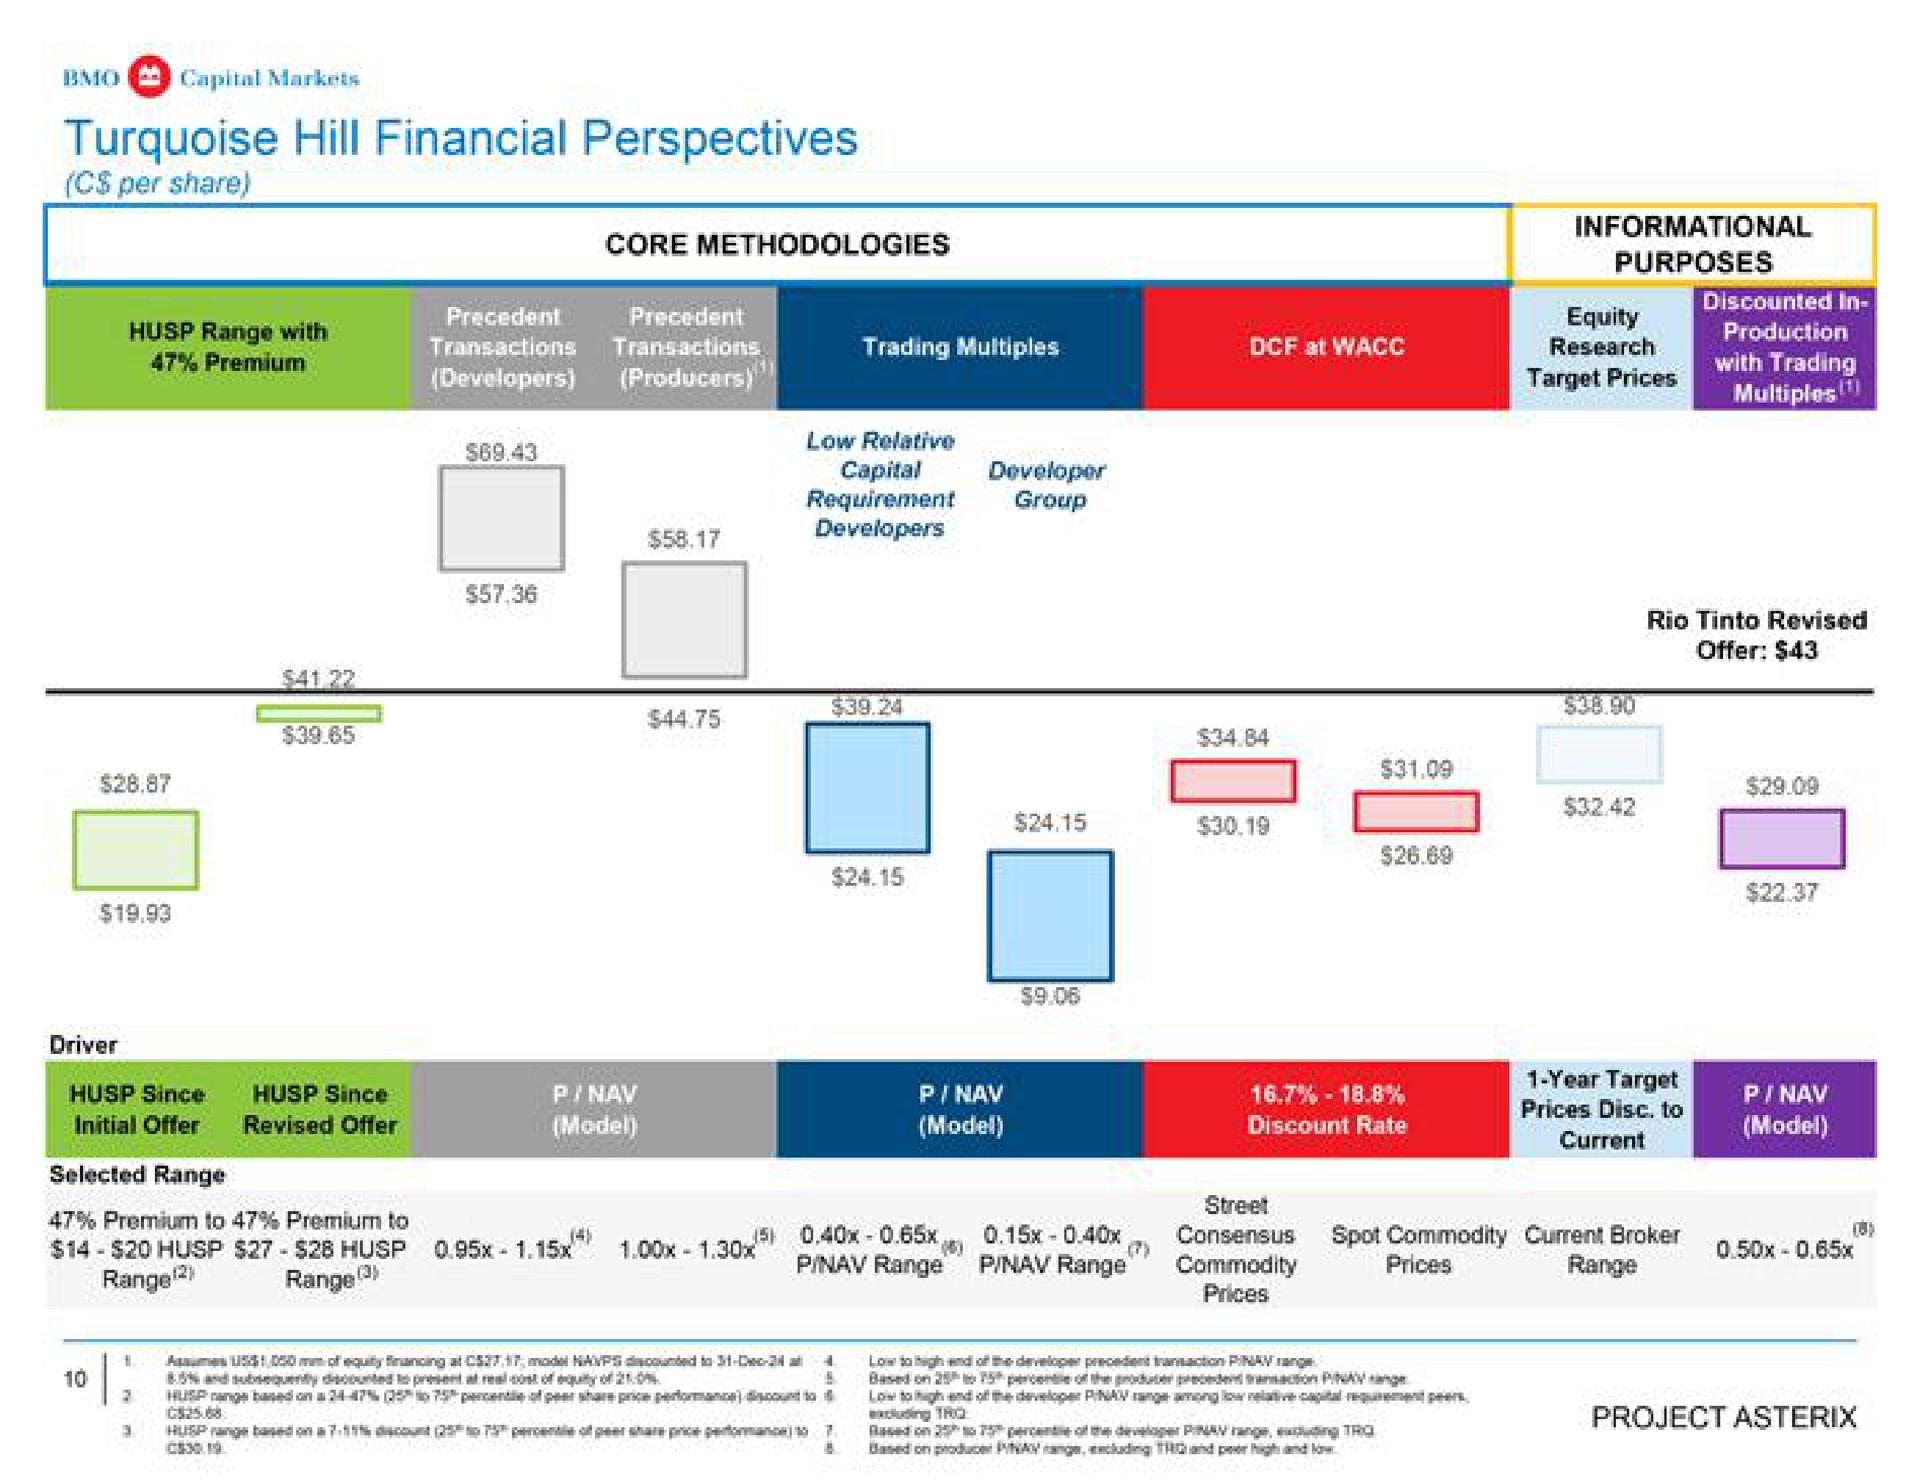 turquoise hill financial perspectives core methodologies purposes informational sie selected range | BMO Capital Markets